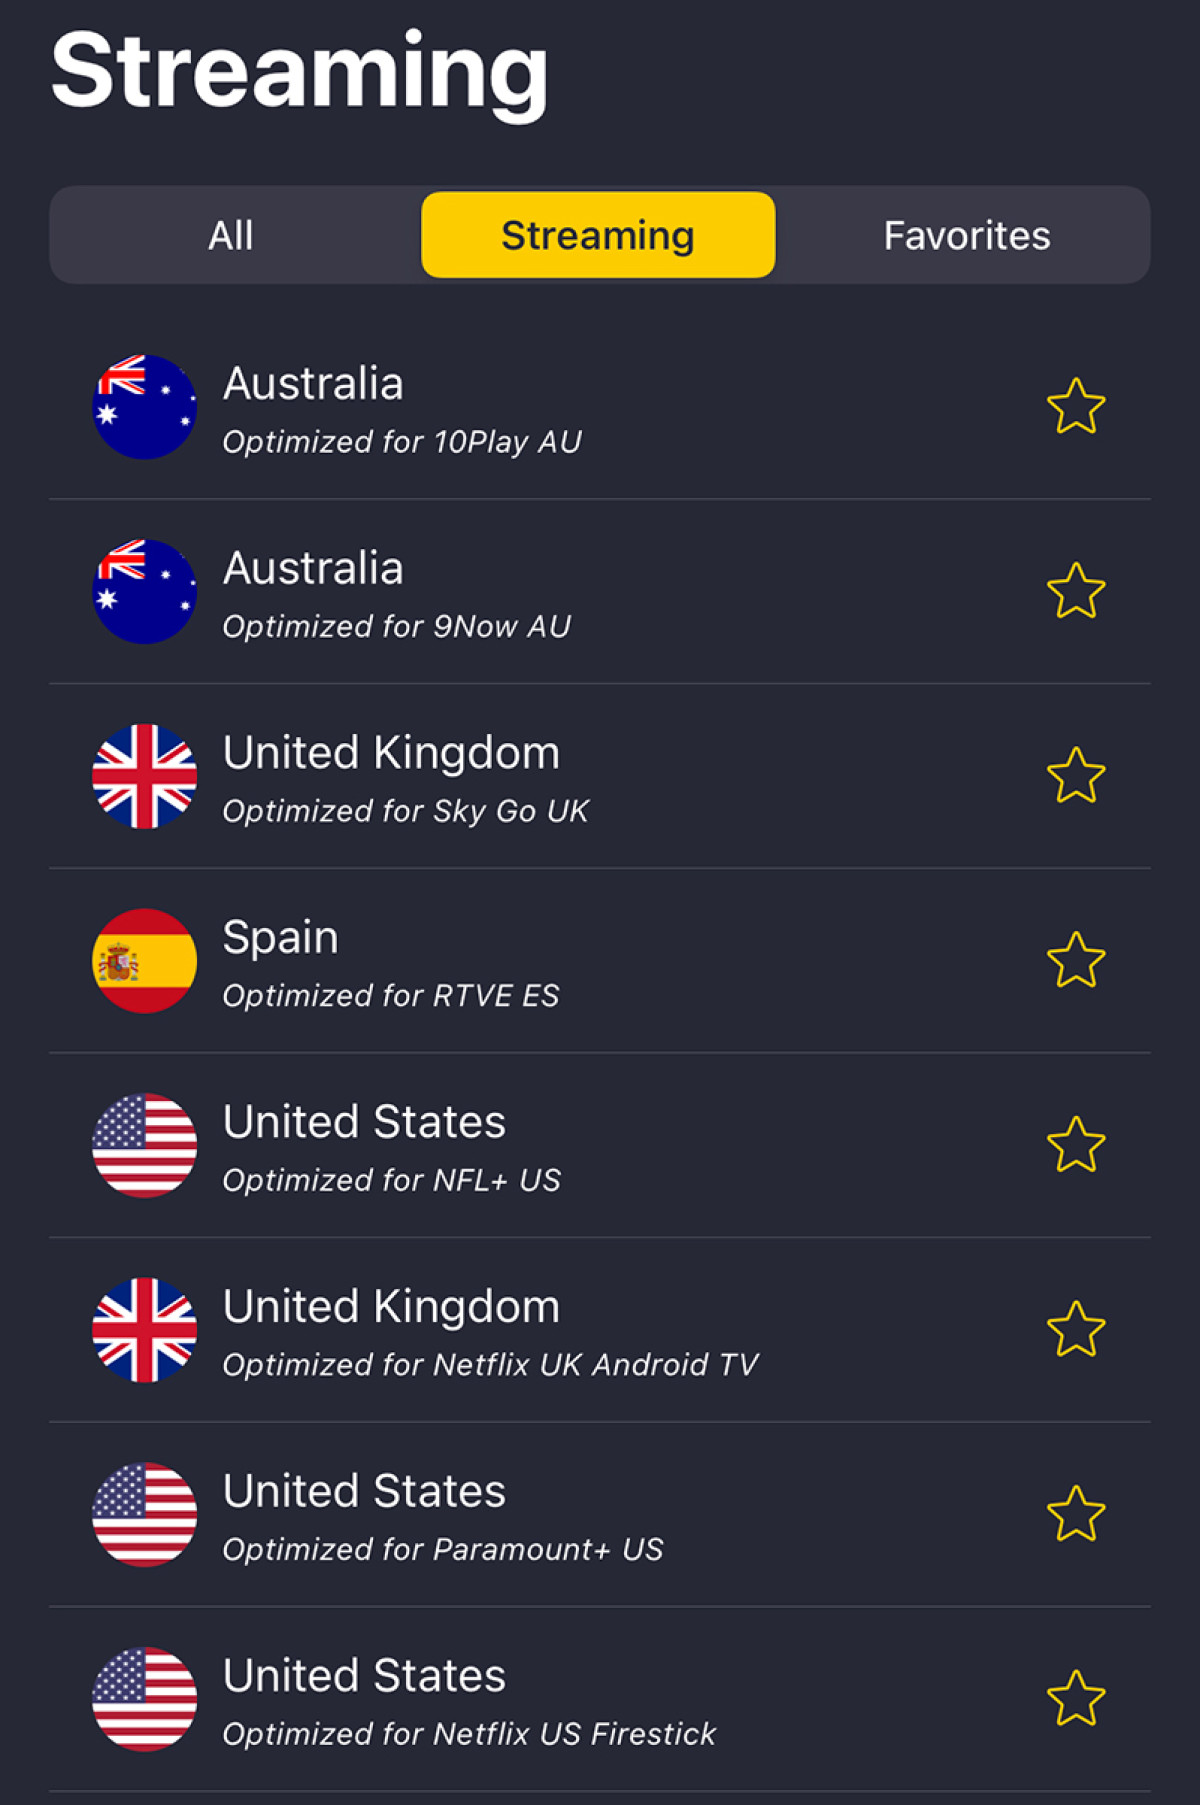 CyberGhost streaming servers on iOS